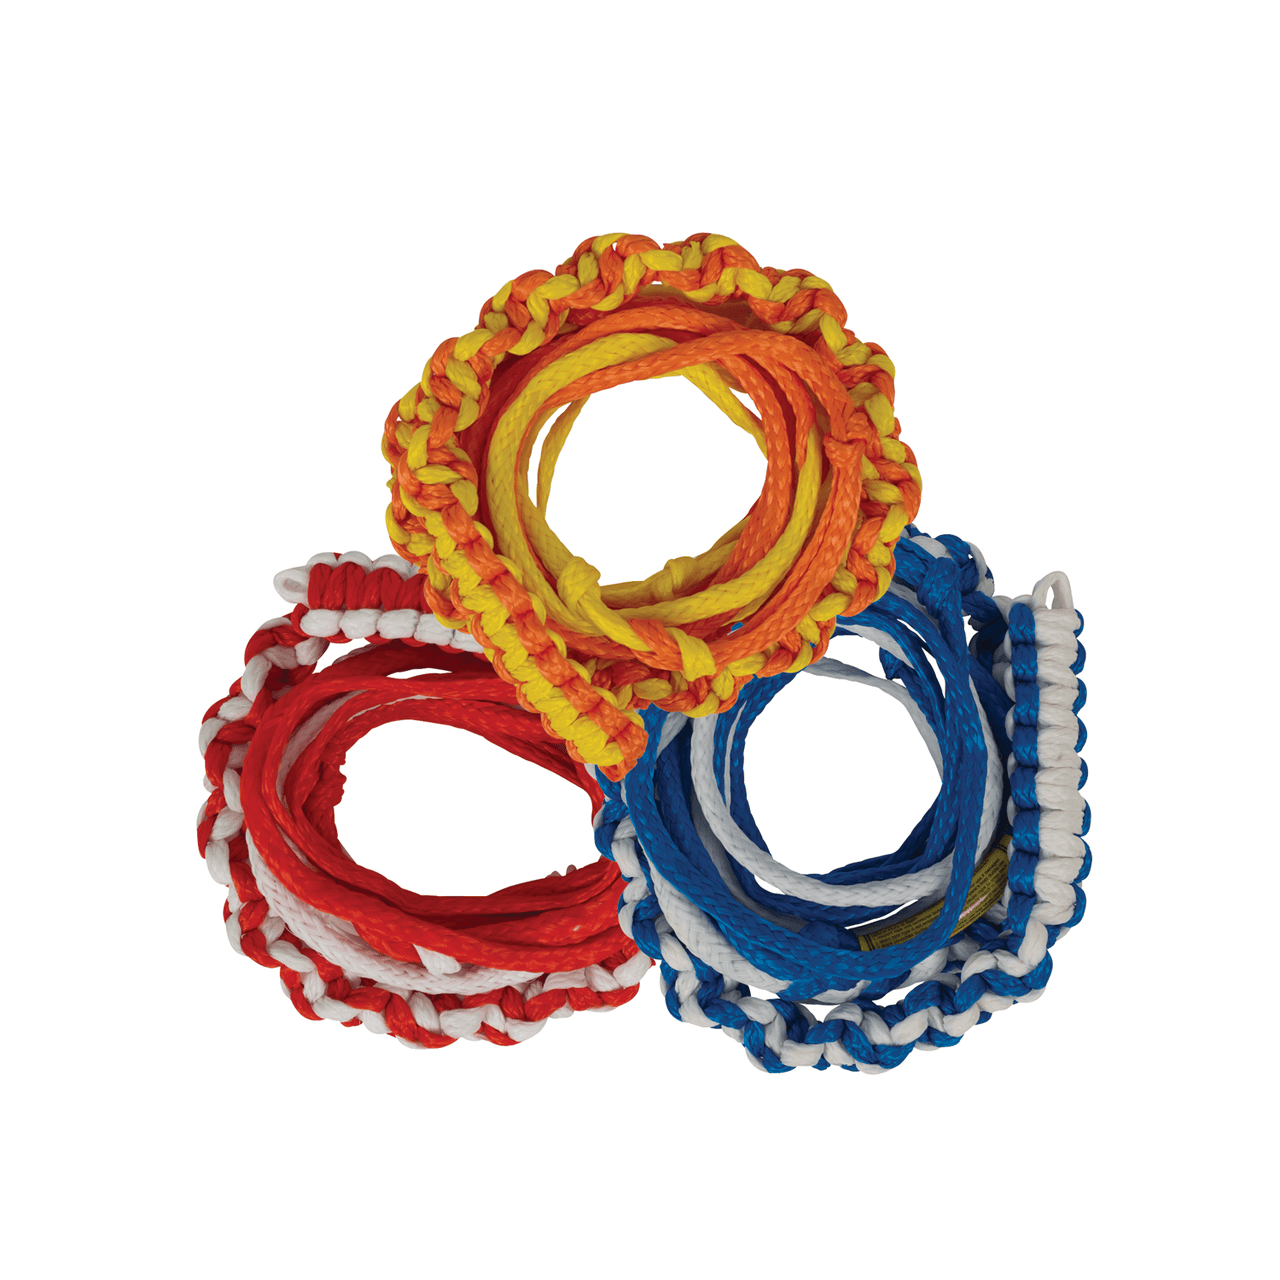 Hyperlite 20' Knotted Surf Rope - No Handle